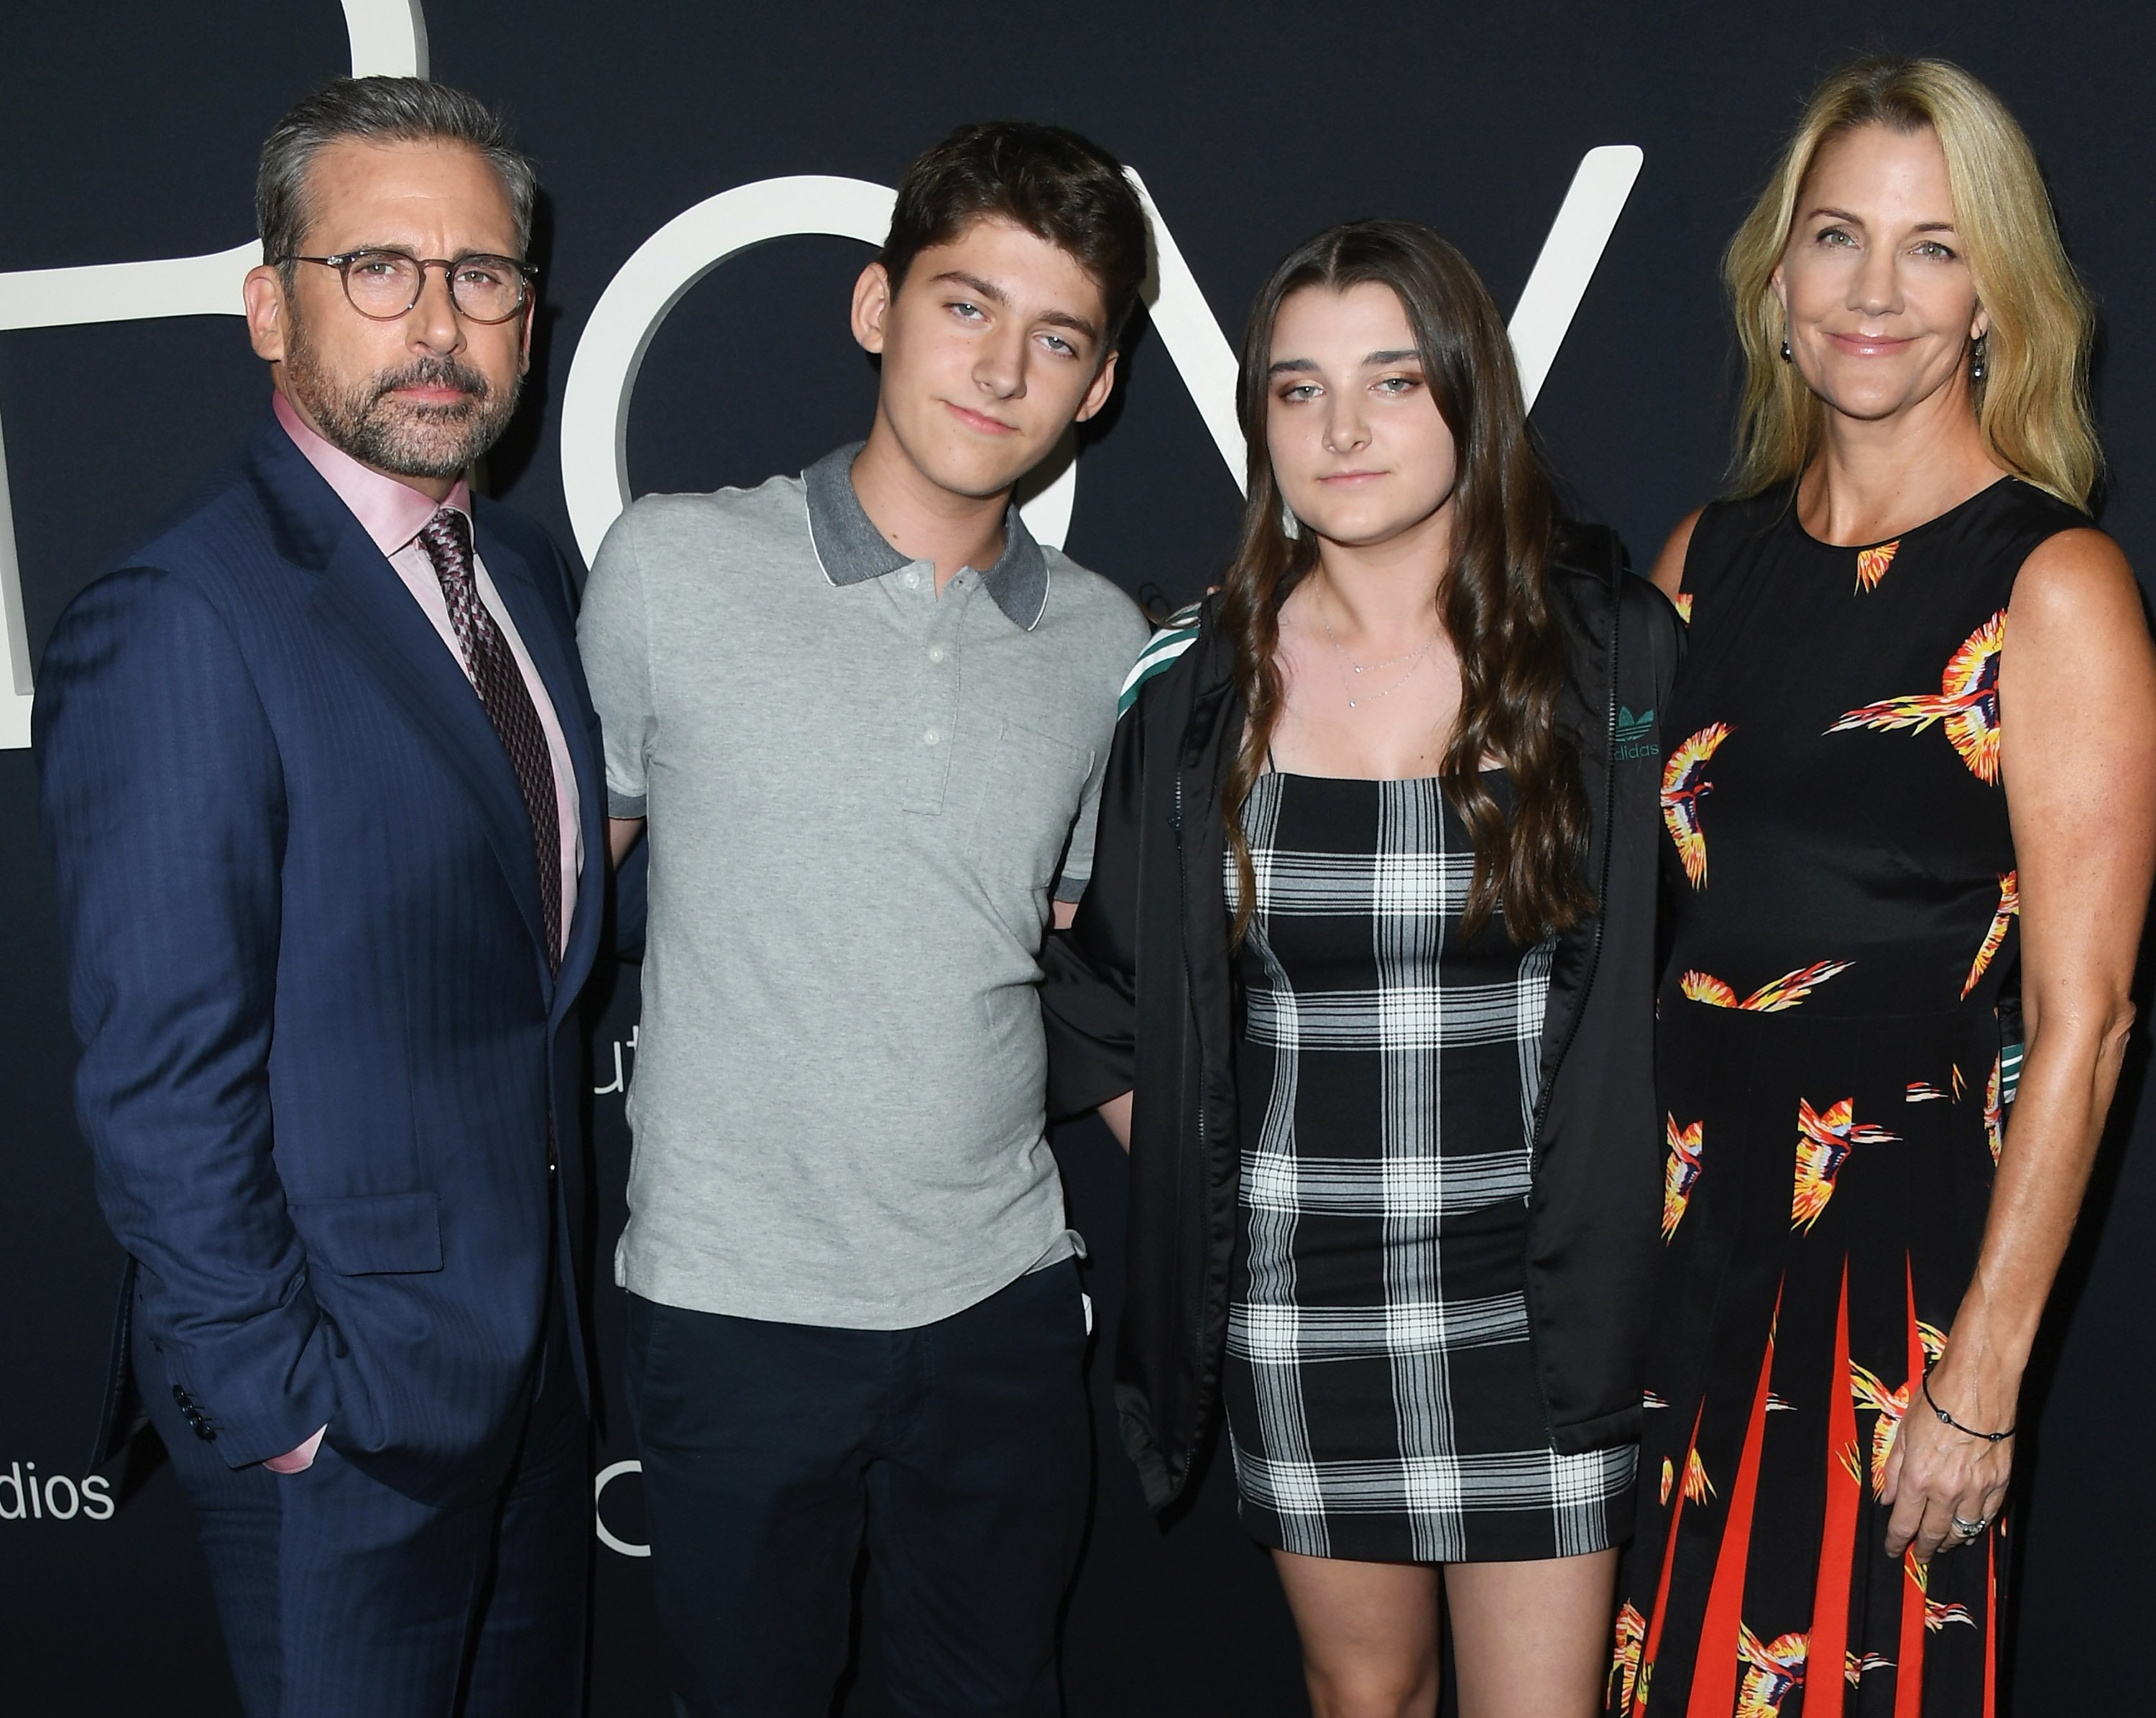 Steve Carell, John Carell, Elisabeth Anne Carell and Nancy Carell attend Amazon Studios of Angeles Premiere Of "Beautiful Boy" at Samuel Goldwyn Theater on October 8, 2018 in Beverly Hills, California. | Source: Getty Images